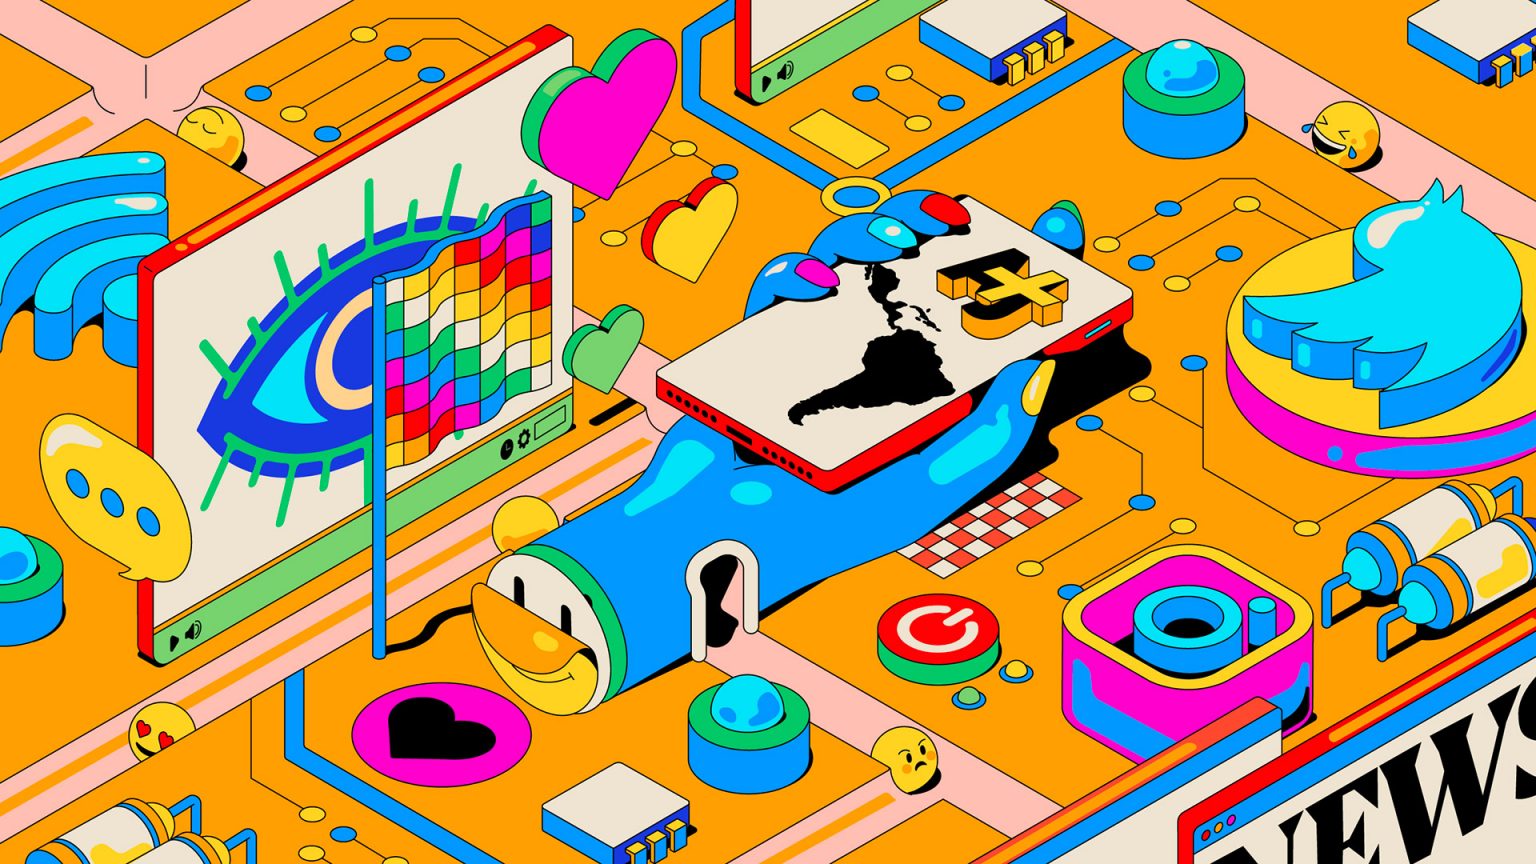 Colorful Illustrations by Meme | Daily design inspiration for creatives ...